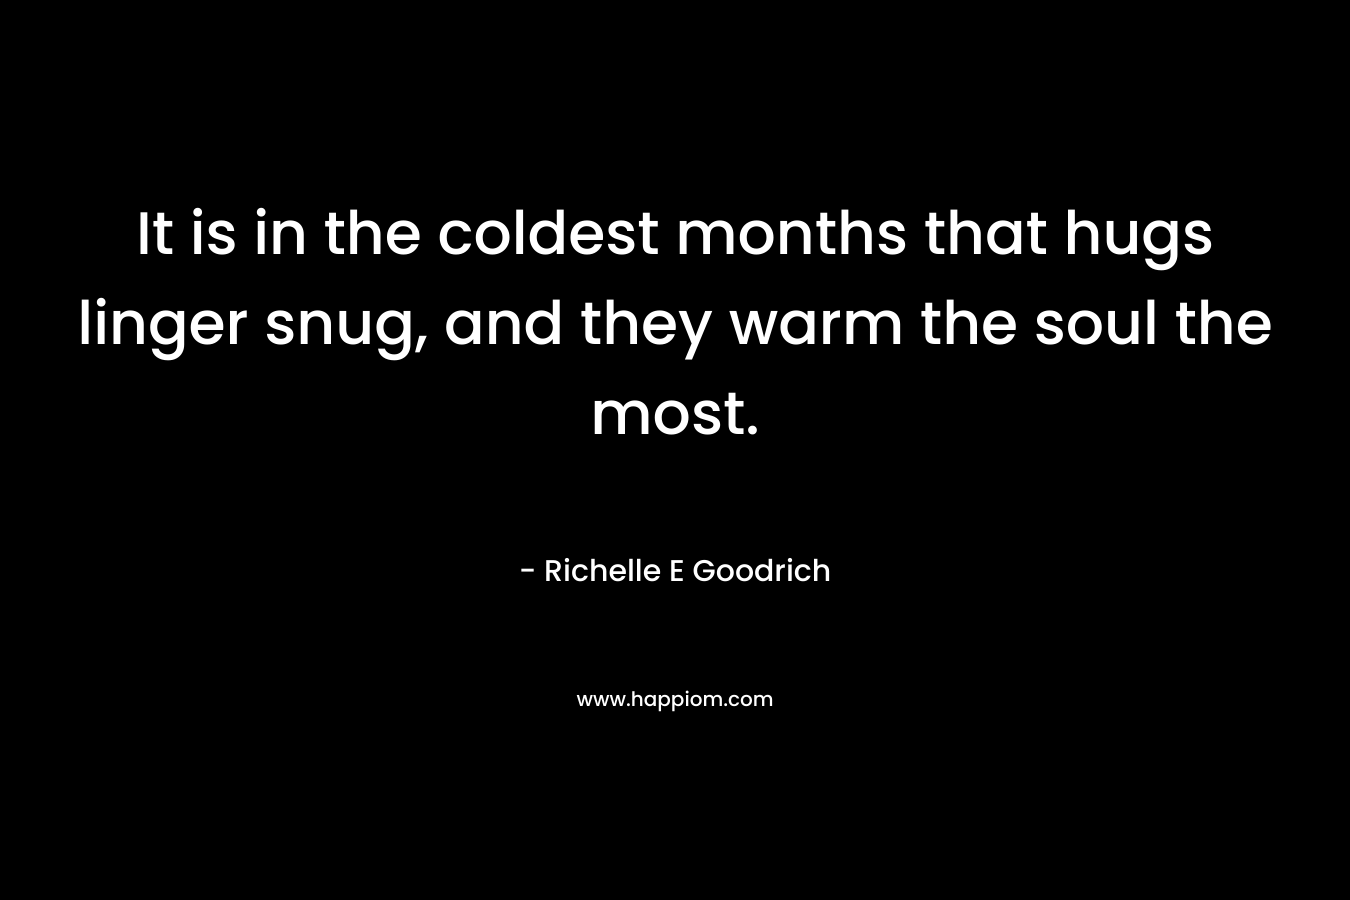 It is in the coldest months that hugs linger snug, and they warm the soul the most. – Richelle E Goodrich